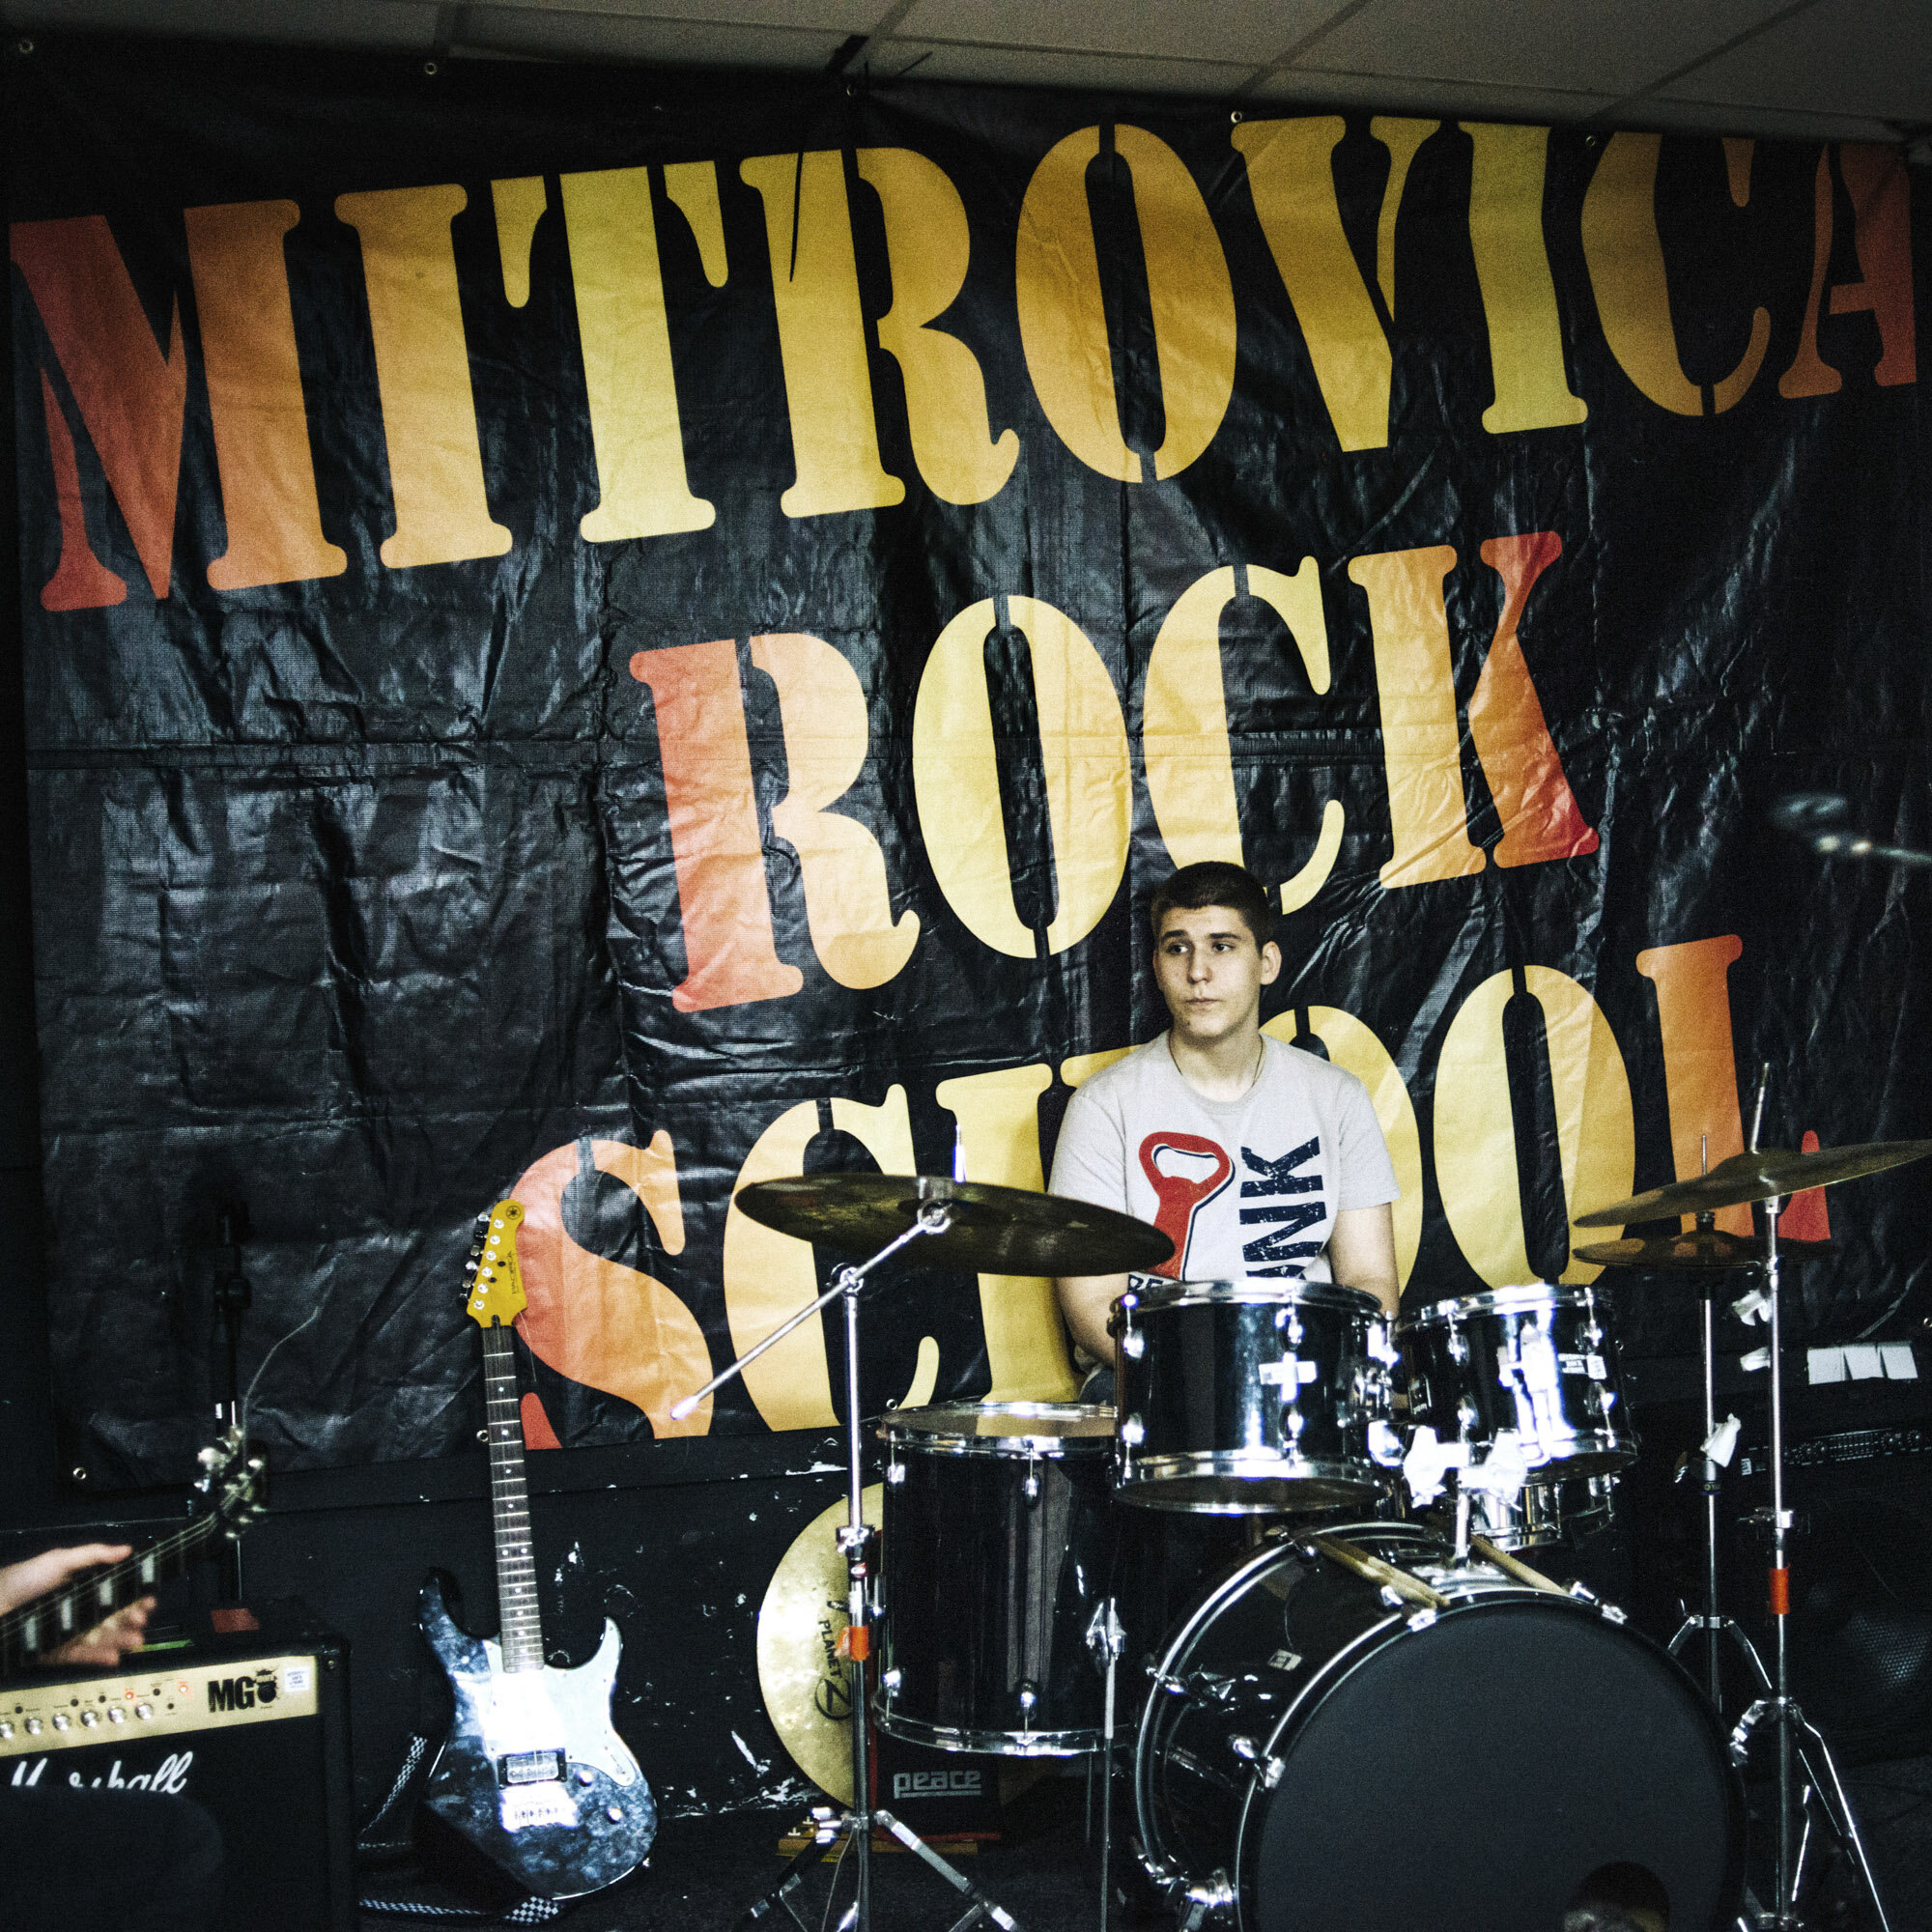  Baton Haxhikadriu plays drum during a rehearsal with his multiethnic rock band in the south branch of the Mitrovica Rock School. Mitrovica, Kosovo, March 24, 2017. 